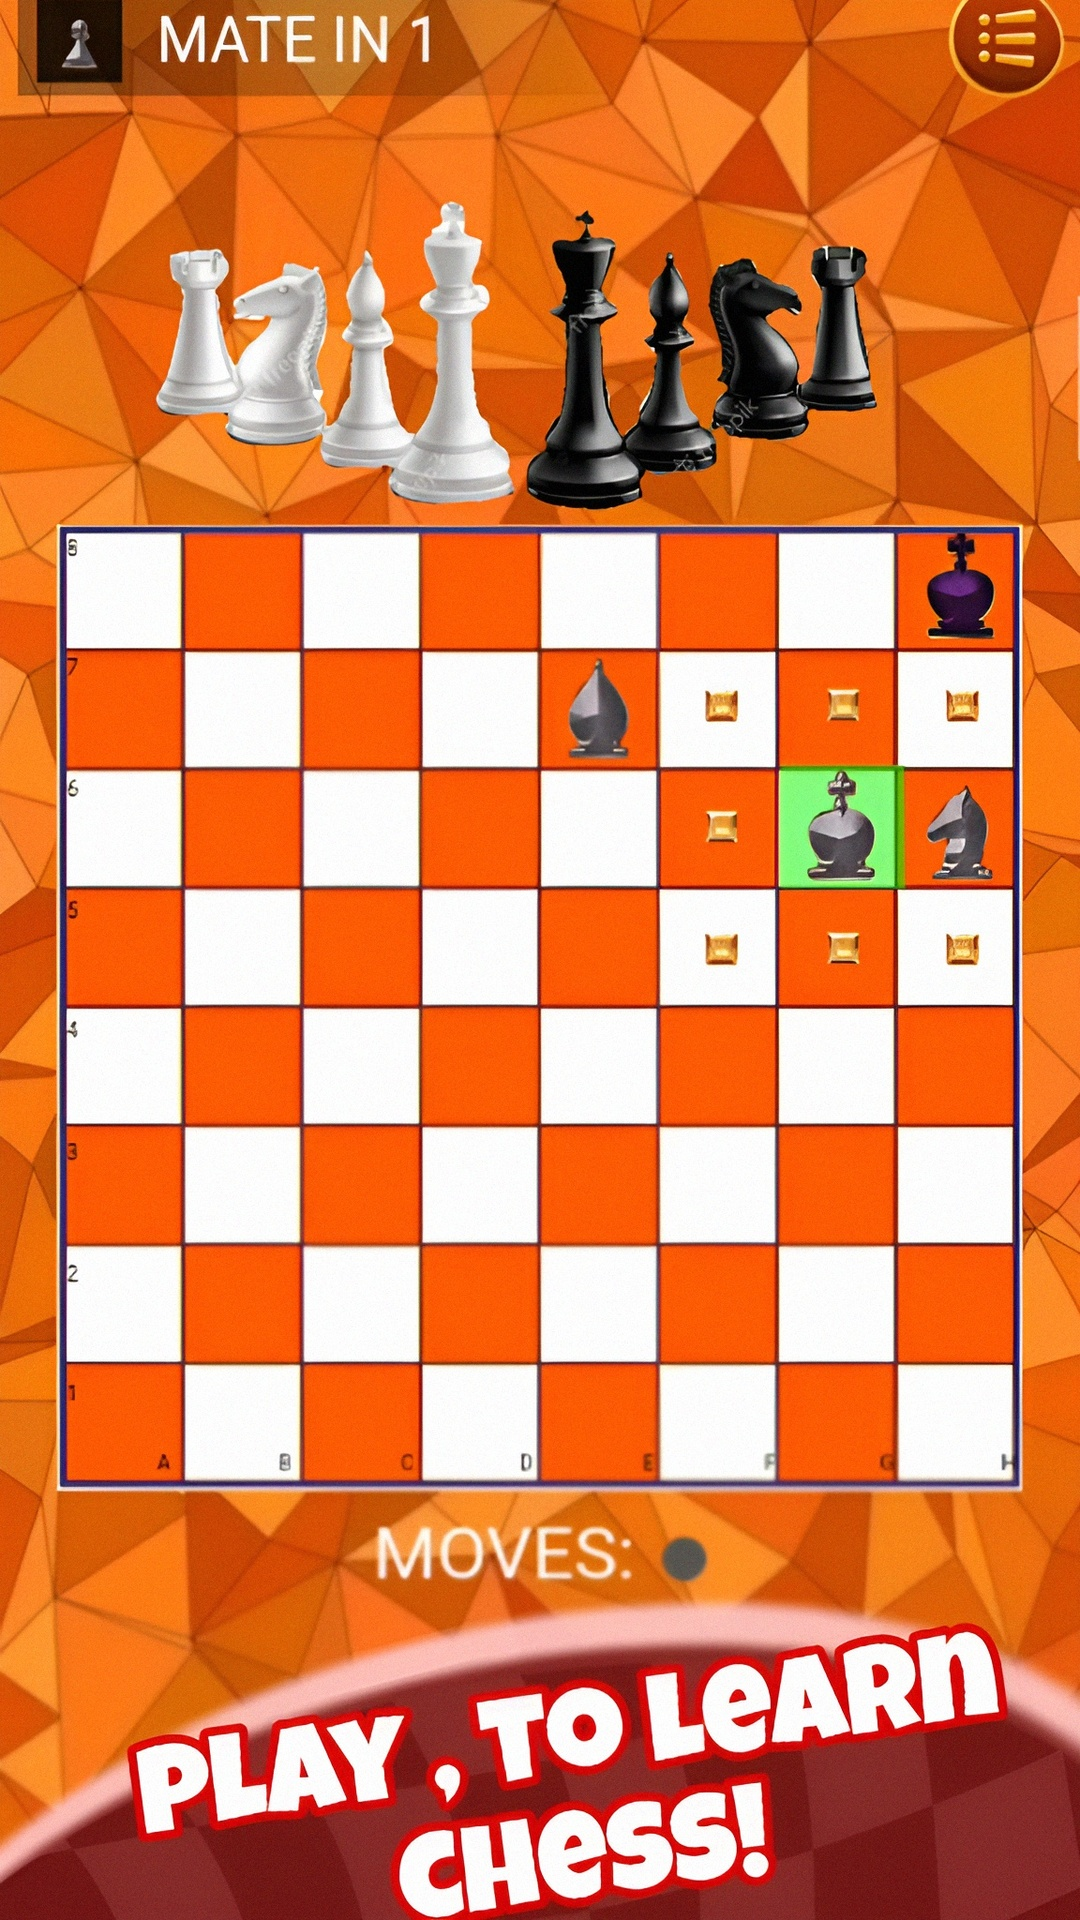 Screenshot of Mate in 1 Move: Chess Puzzle